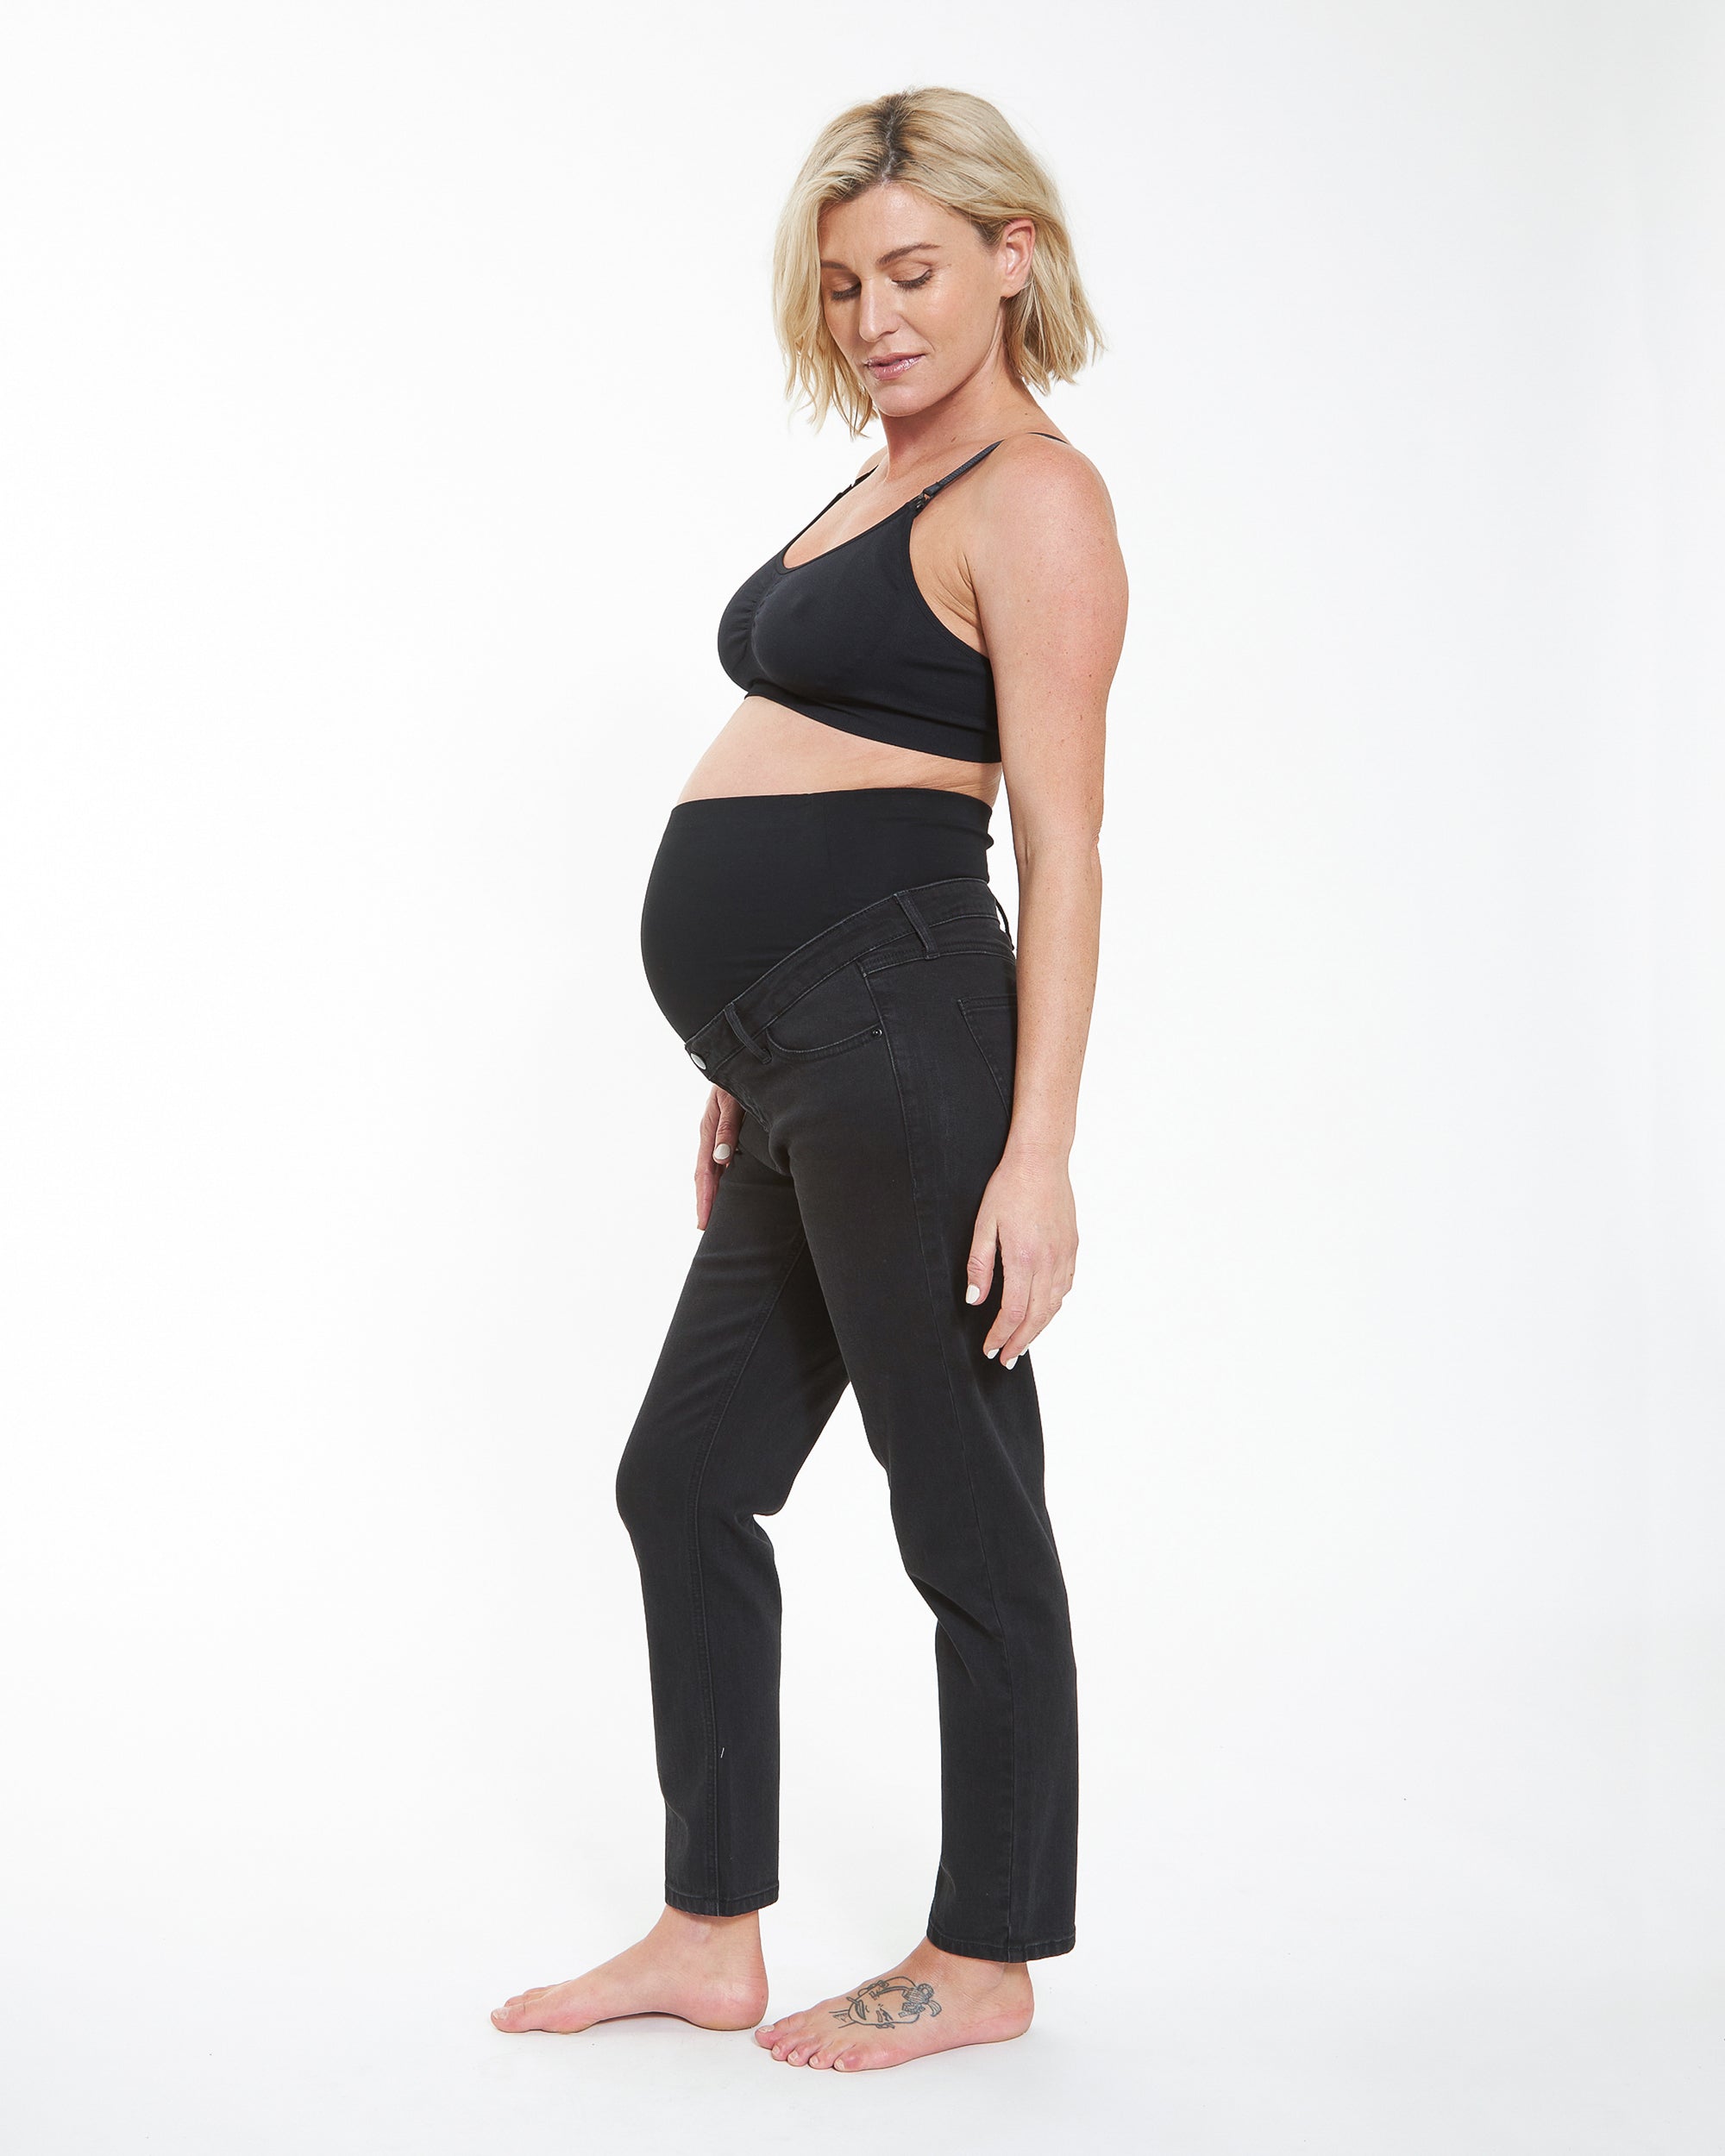 What Not to Wear when You're Pregnant | Lenny Rose Active